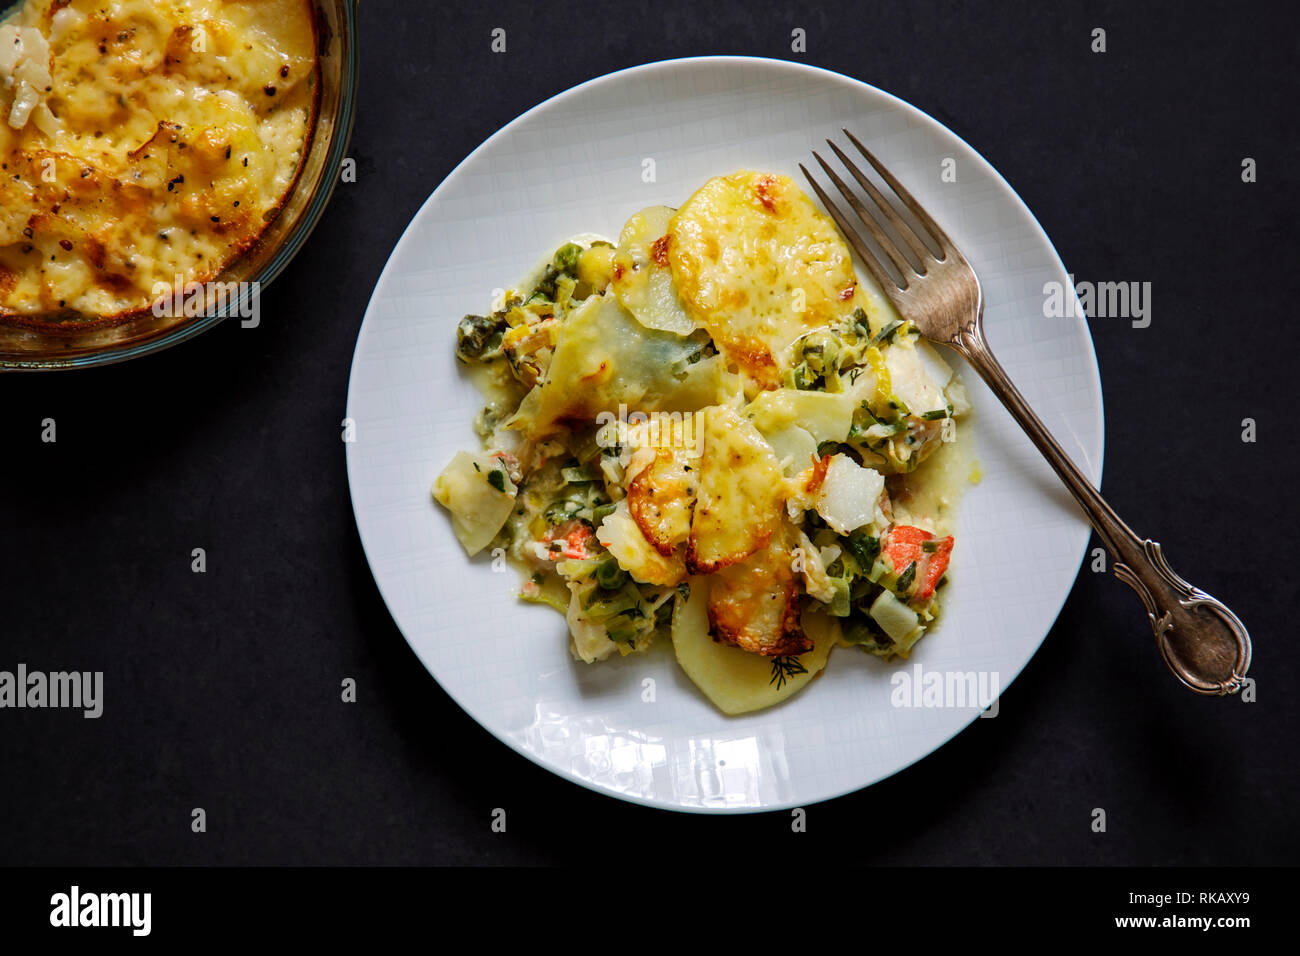 Fish pie with sliced potato topping Stock Photo